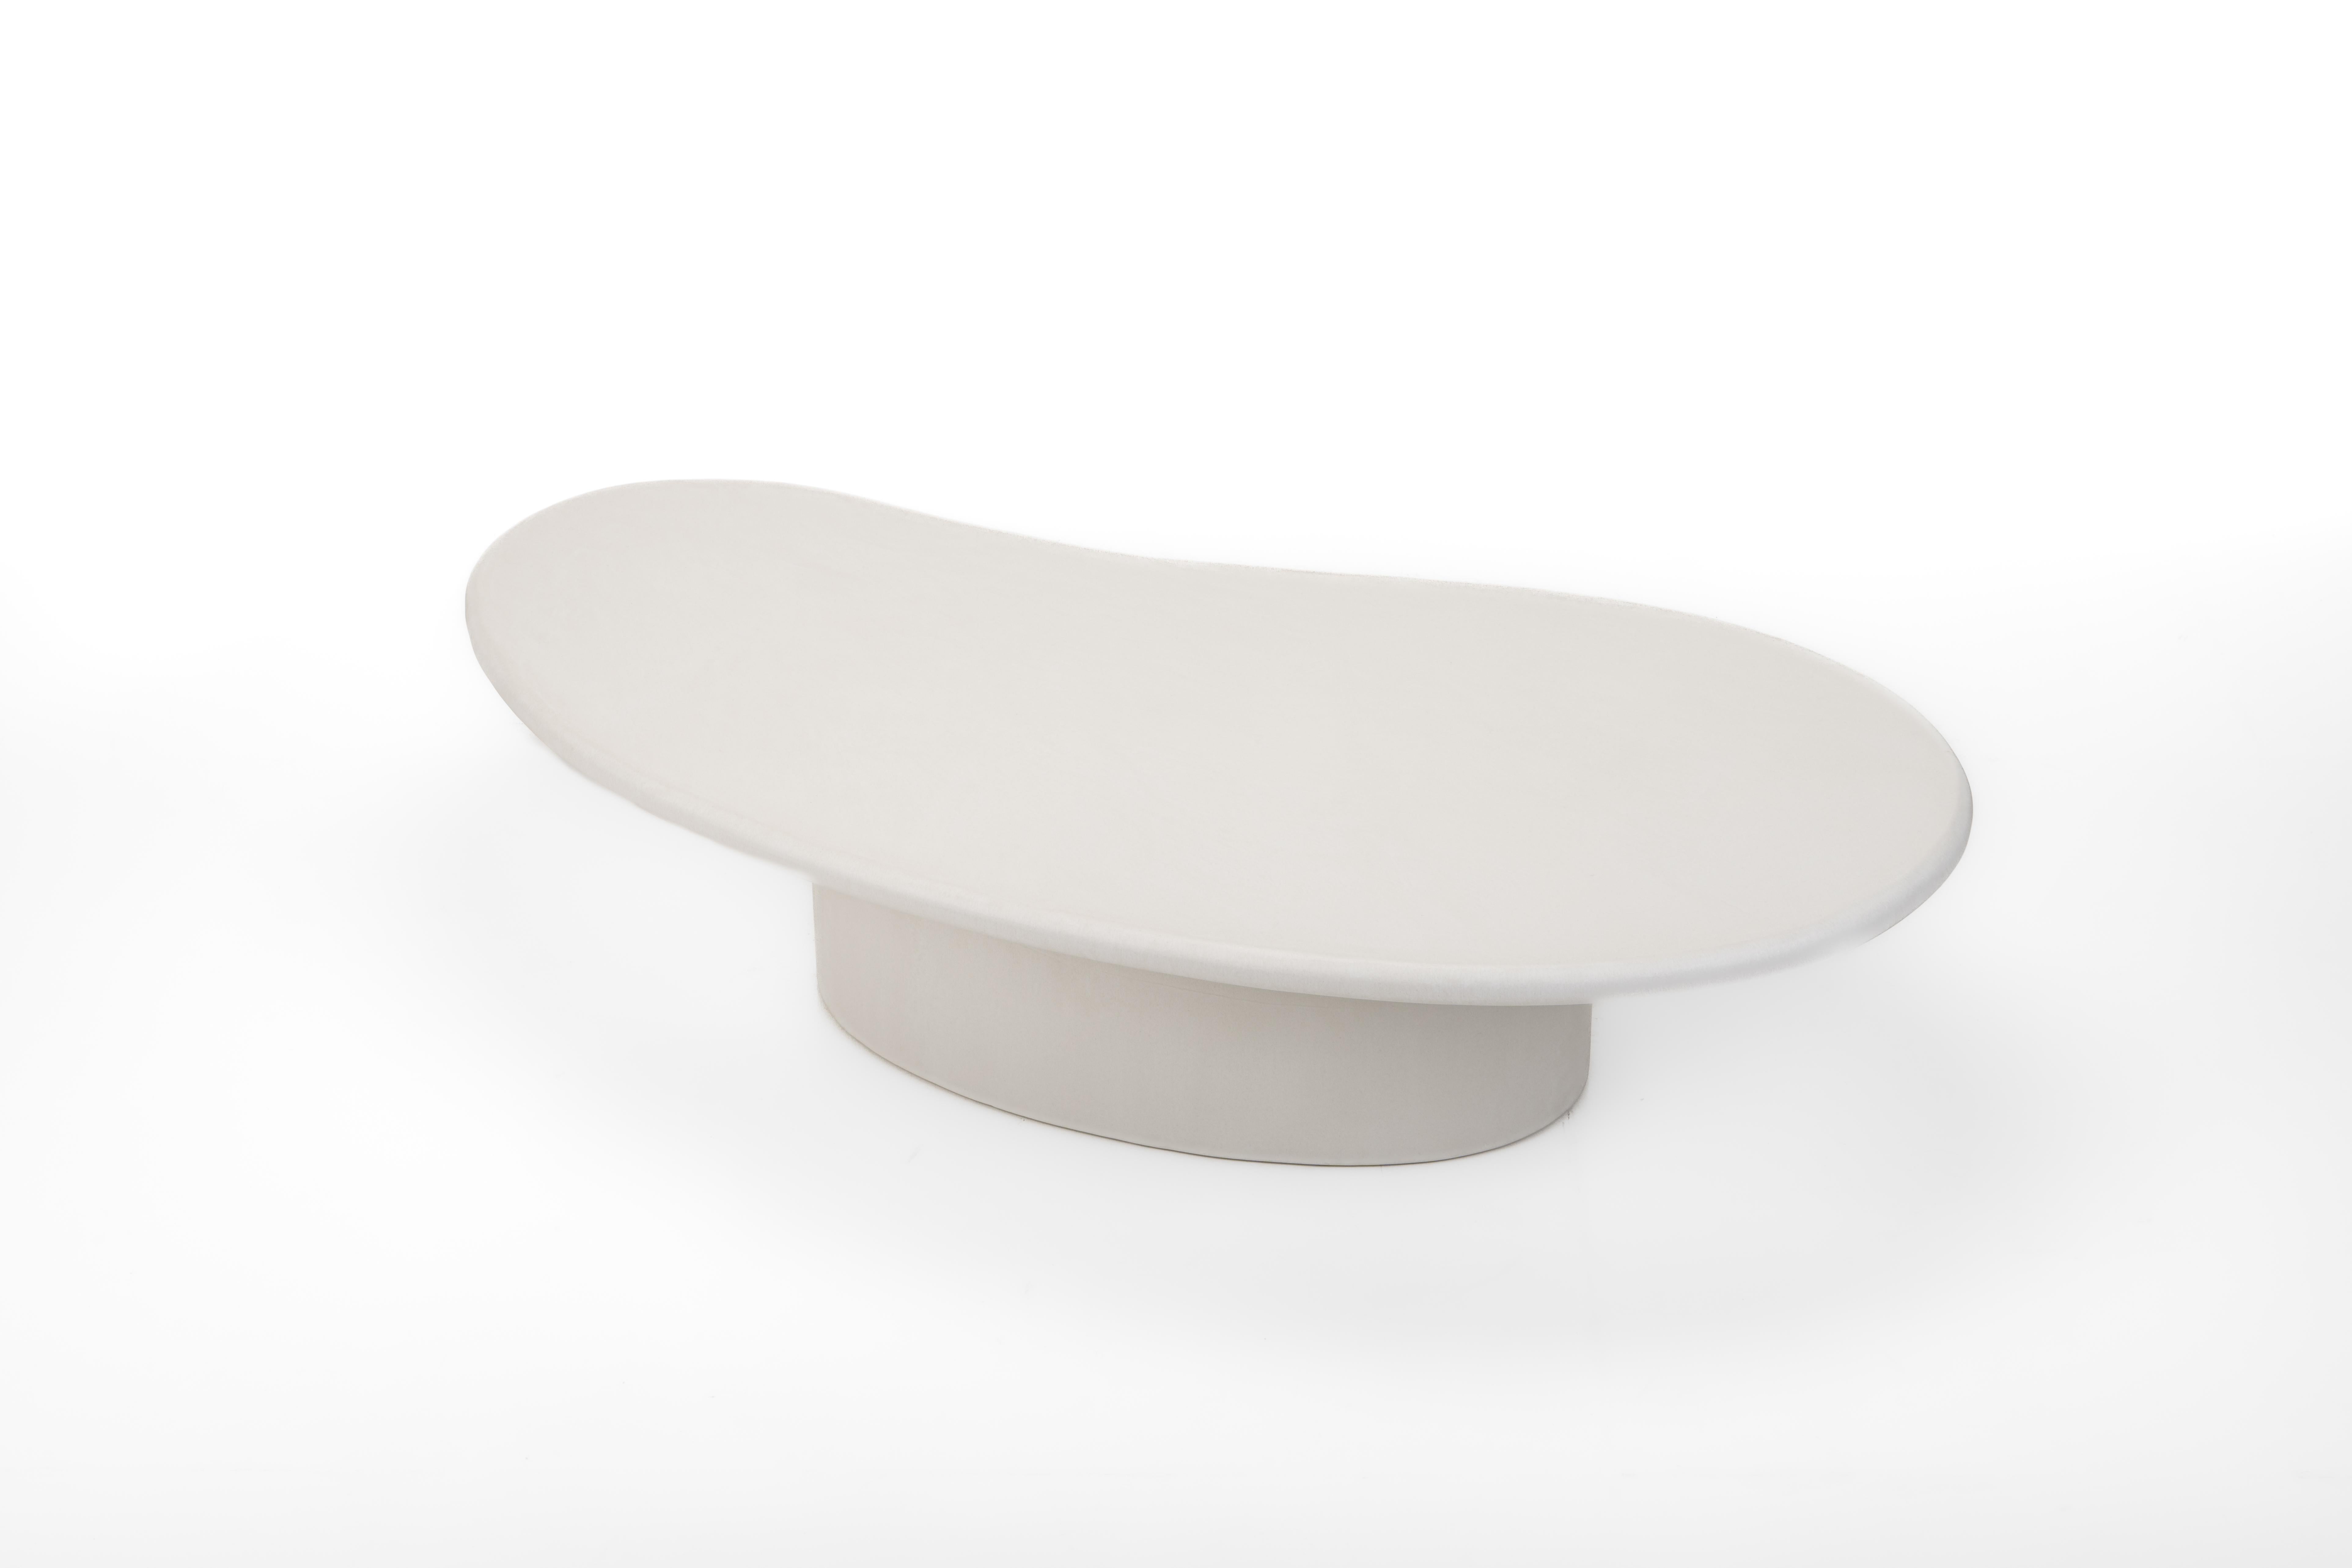 Belgian Organic Shaped Natural Plaster Coffee Table 